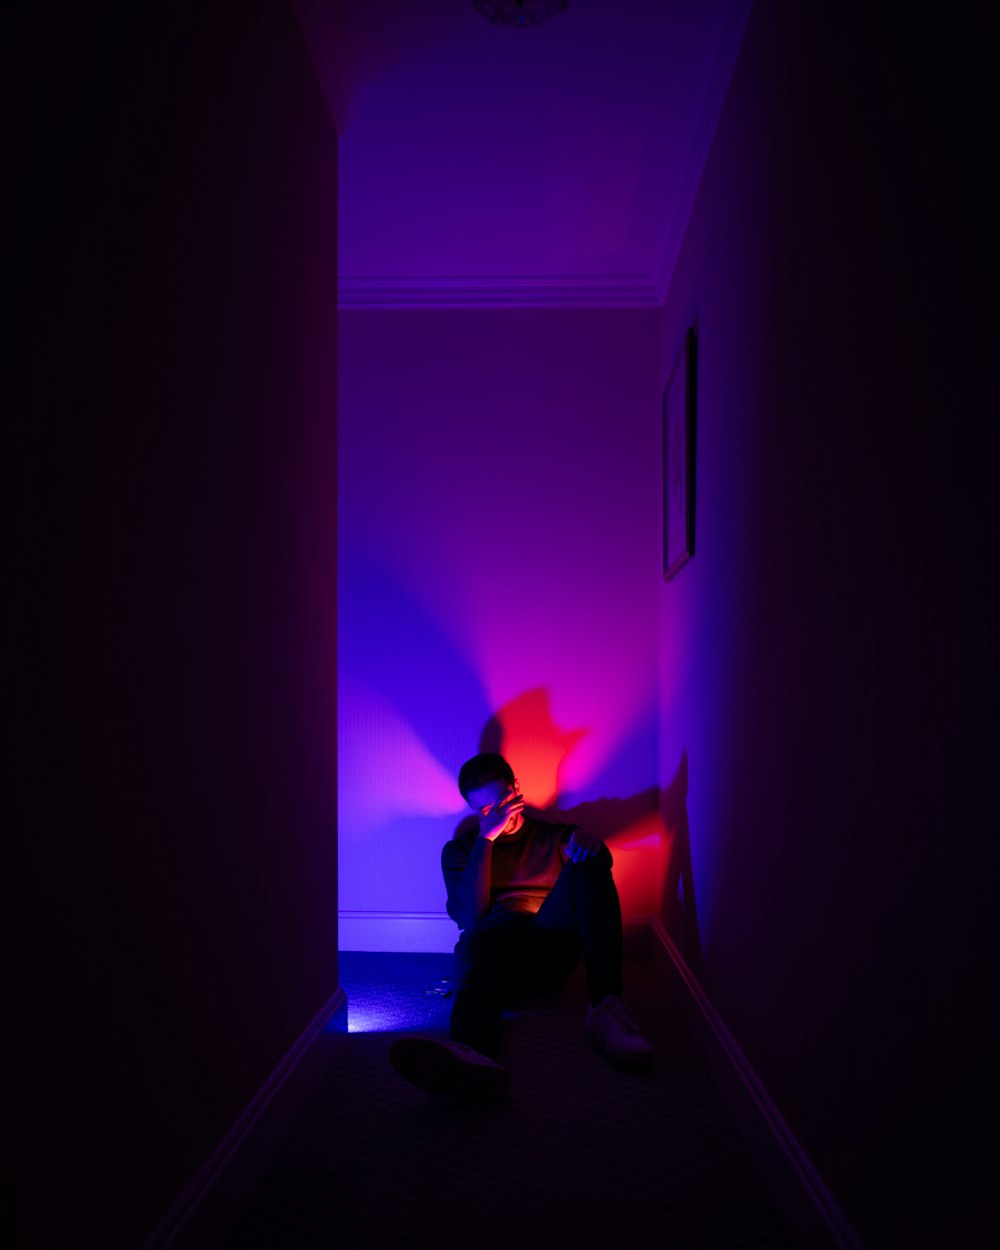 a person sitting in a dark room with a purple light